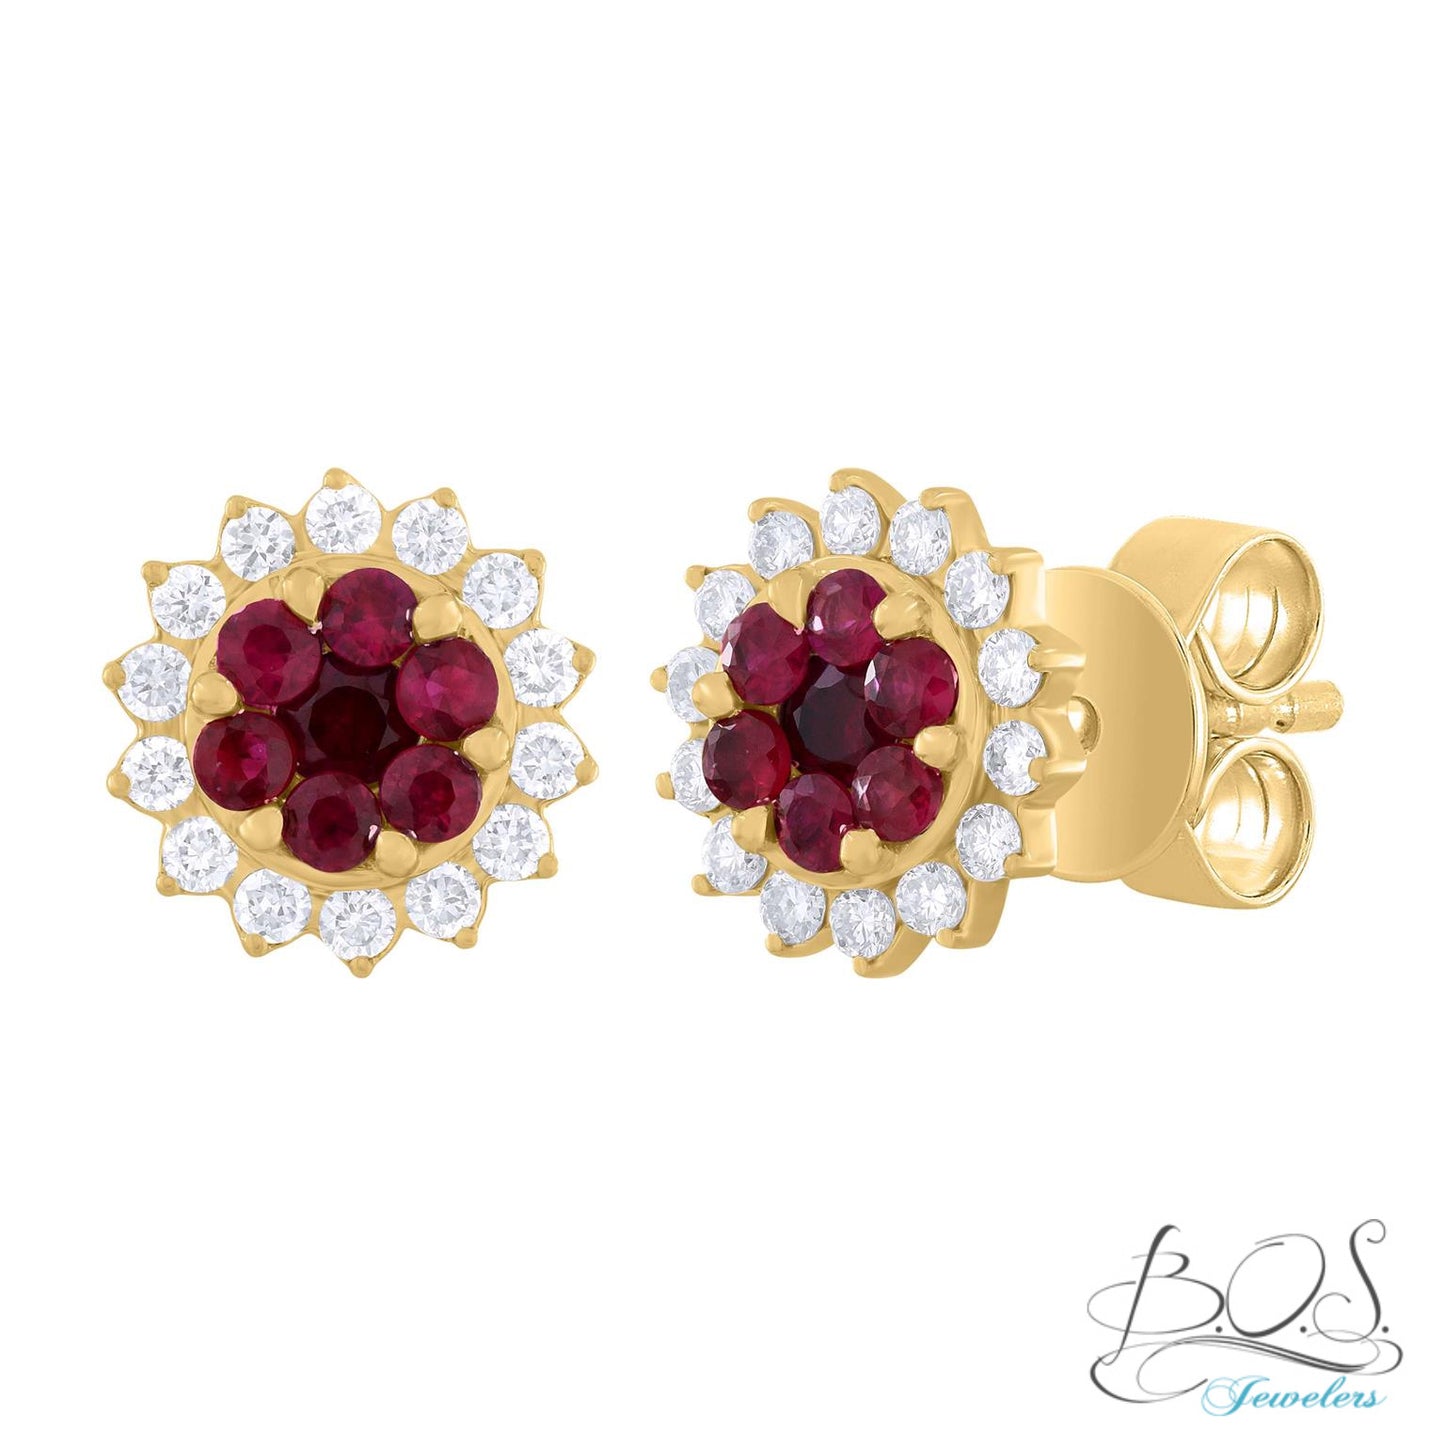 14K Gold Diamond Flower with Color Stone Earrings.